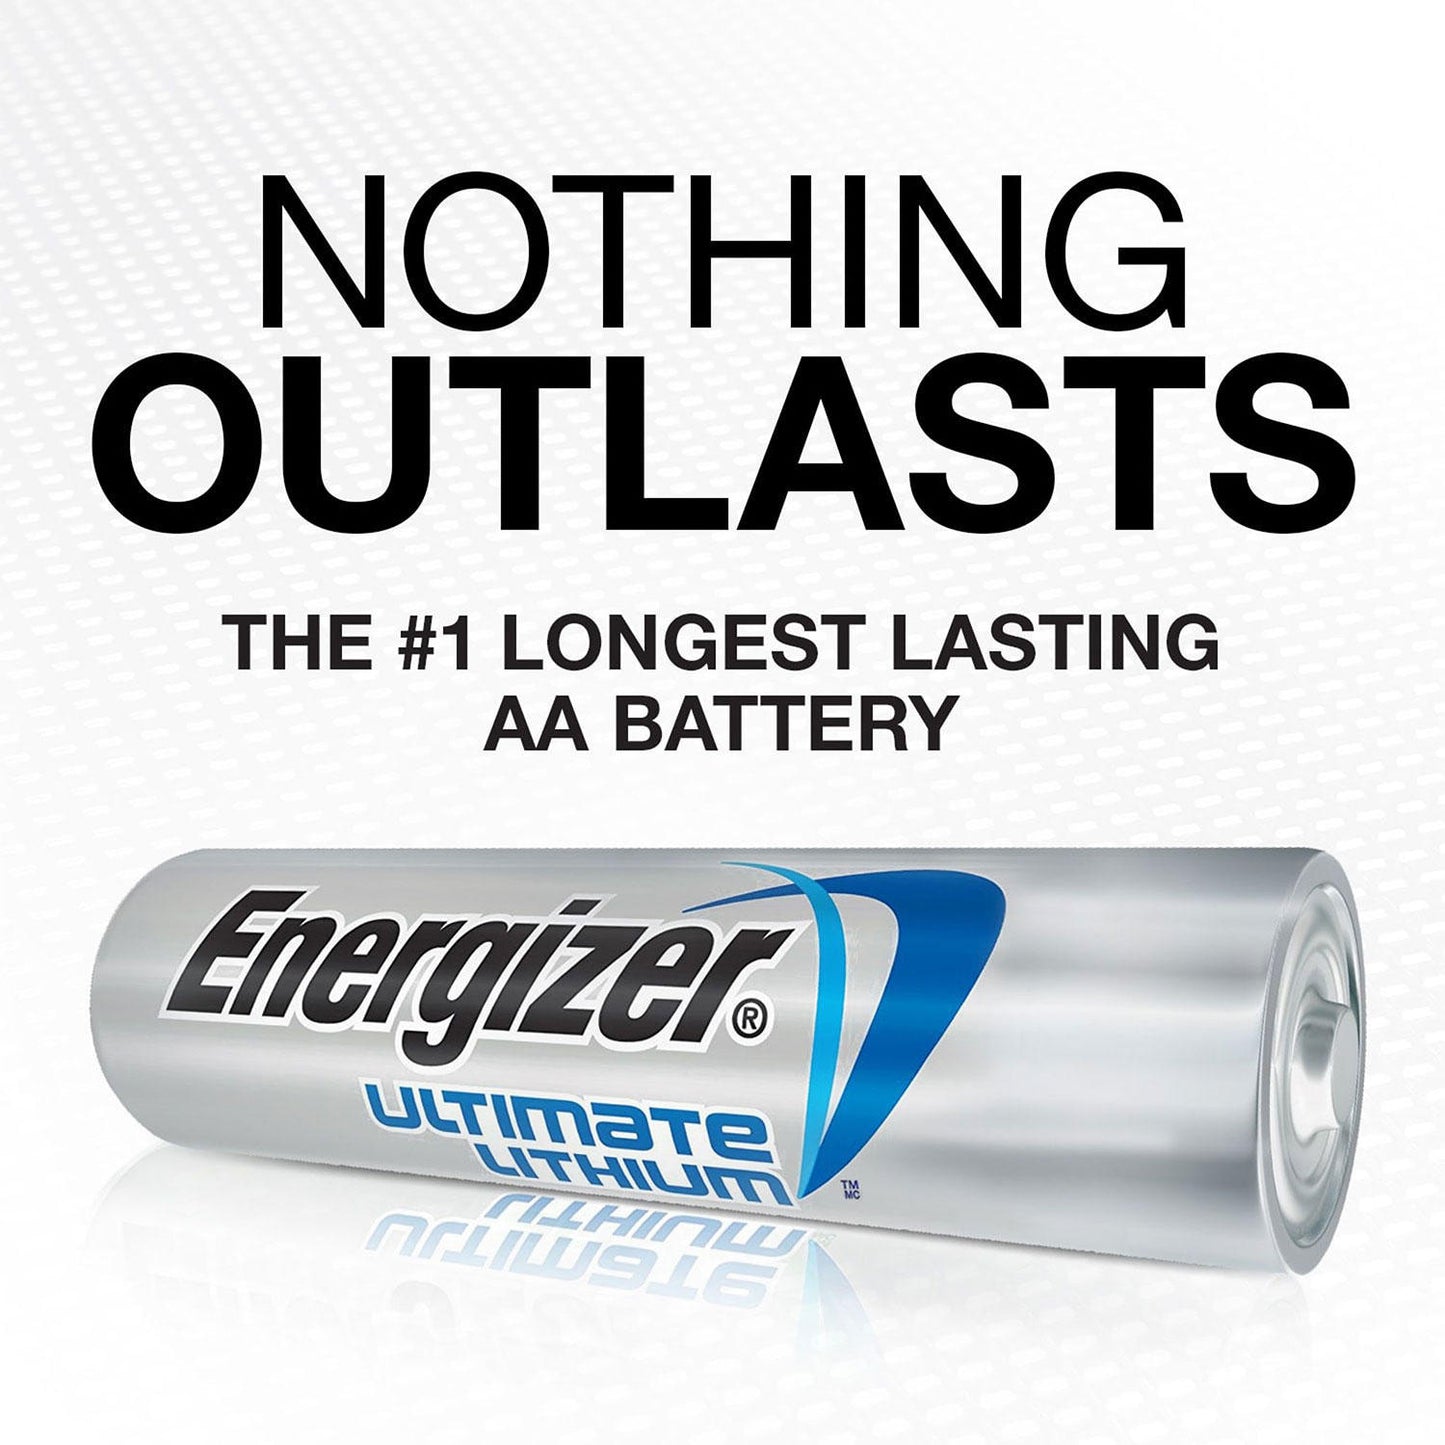 Energizer Ultimate Lithium AA 18-Pack